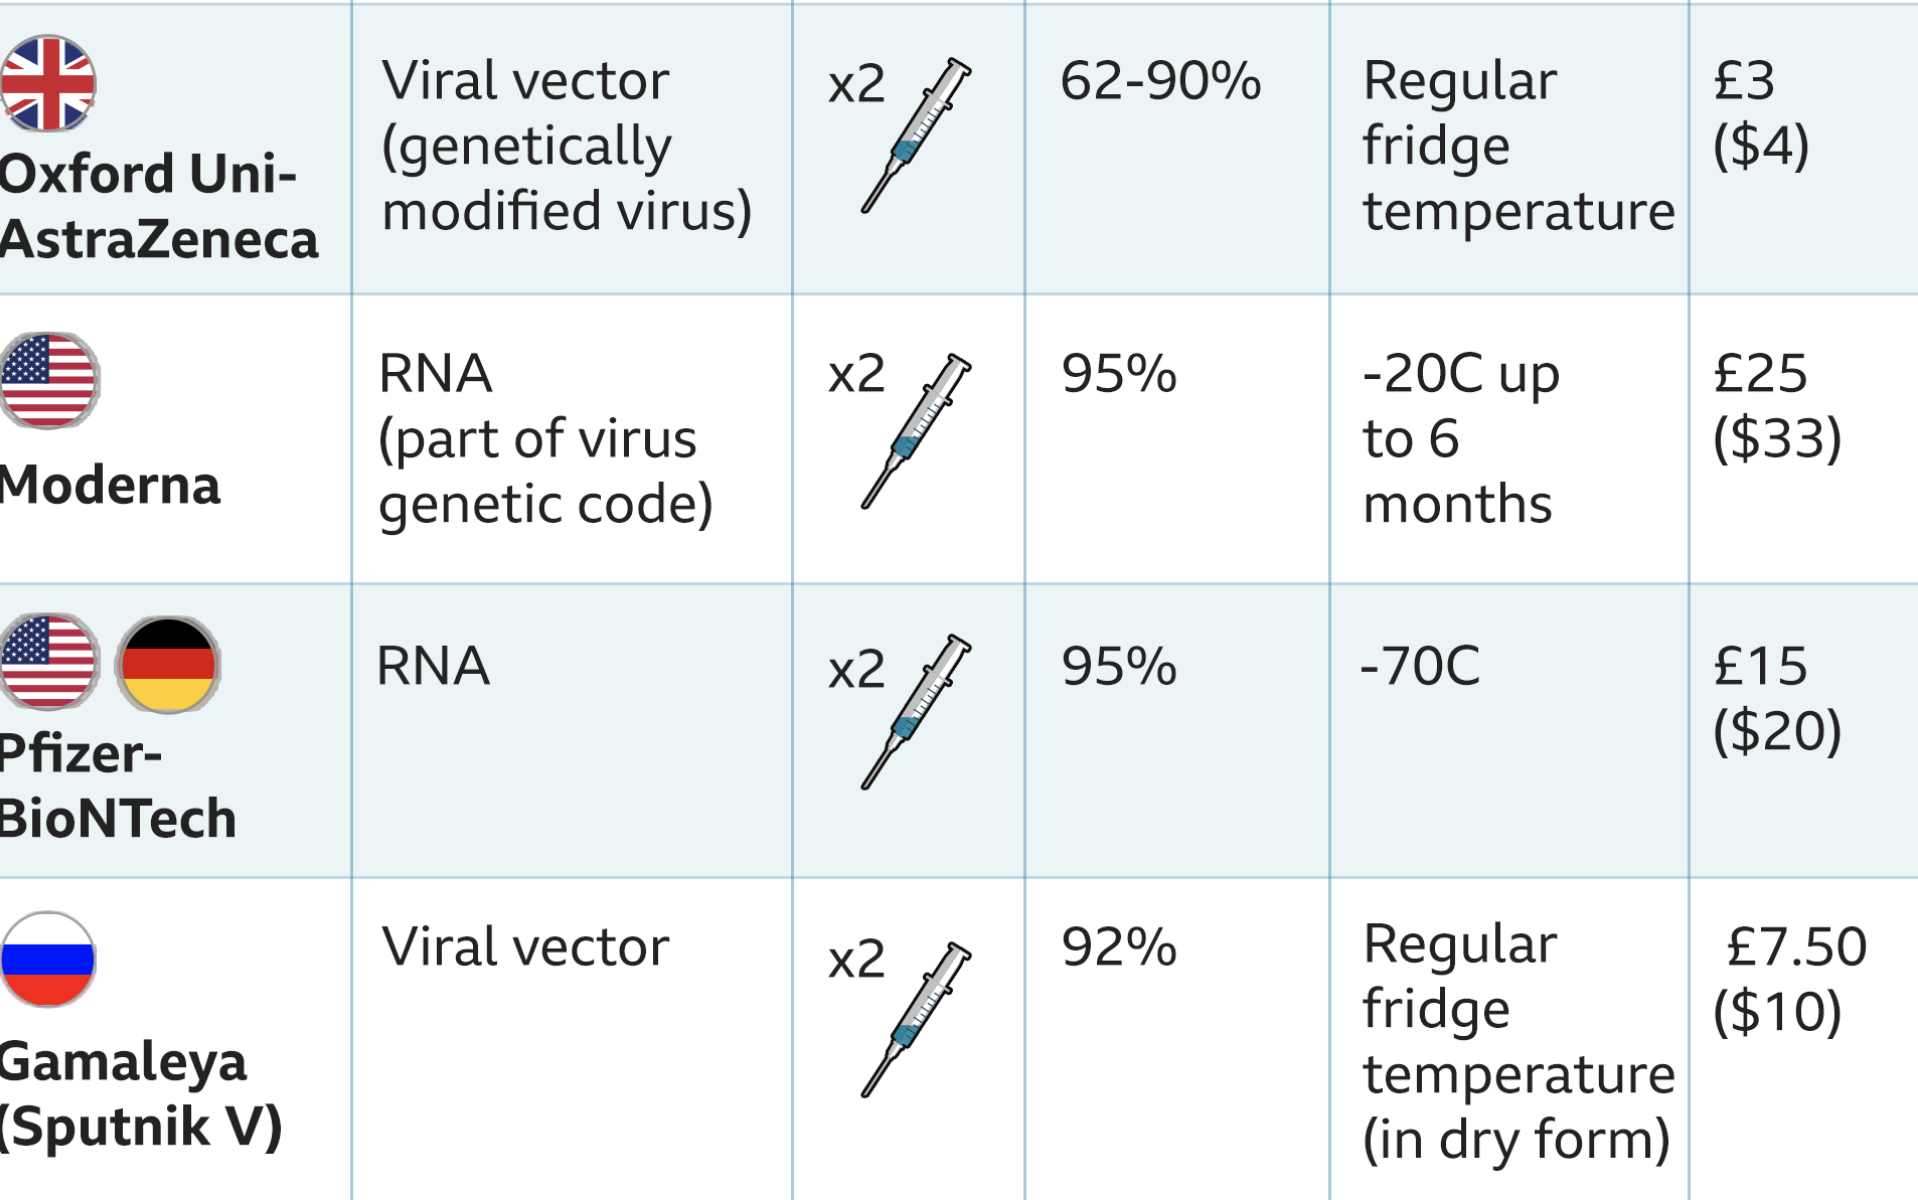 How the different vaccine compares including manufacturer, storage temperature, cost per dose.